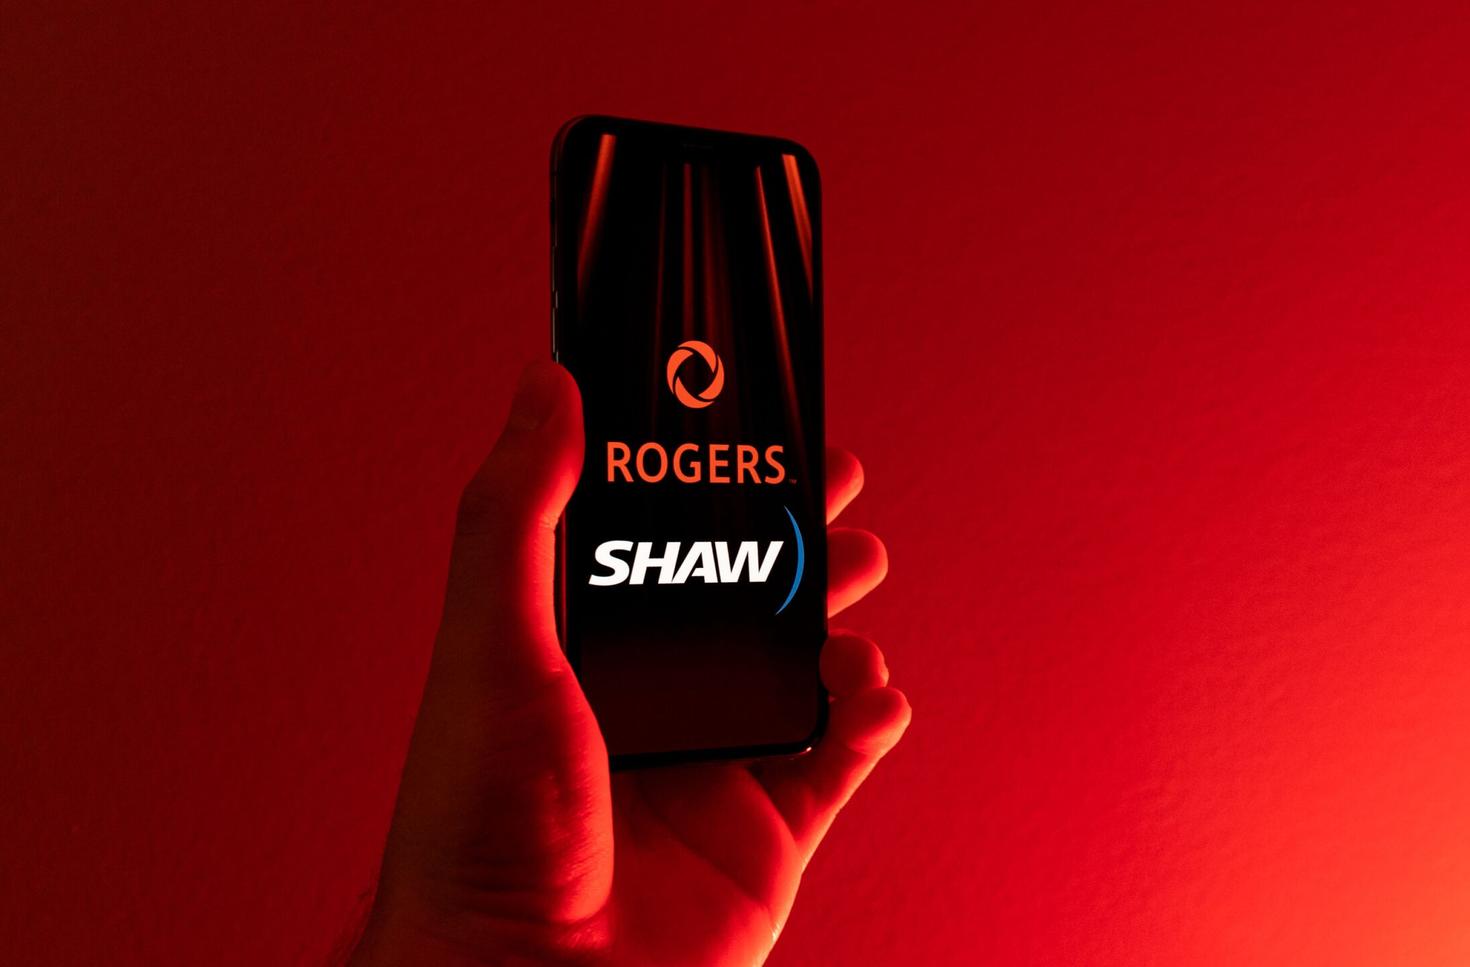 Fusion Rogers-Shaw